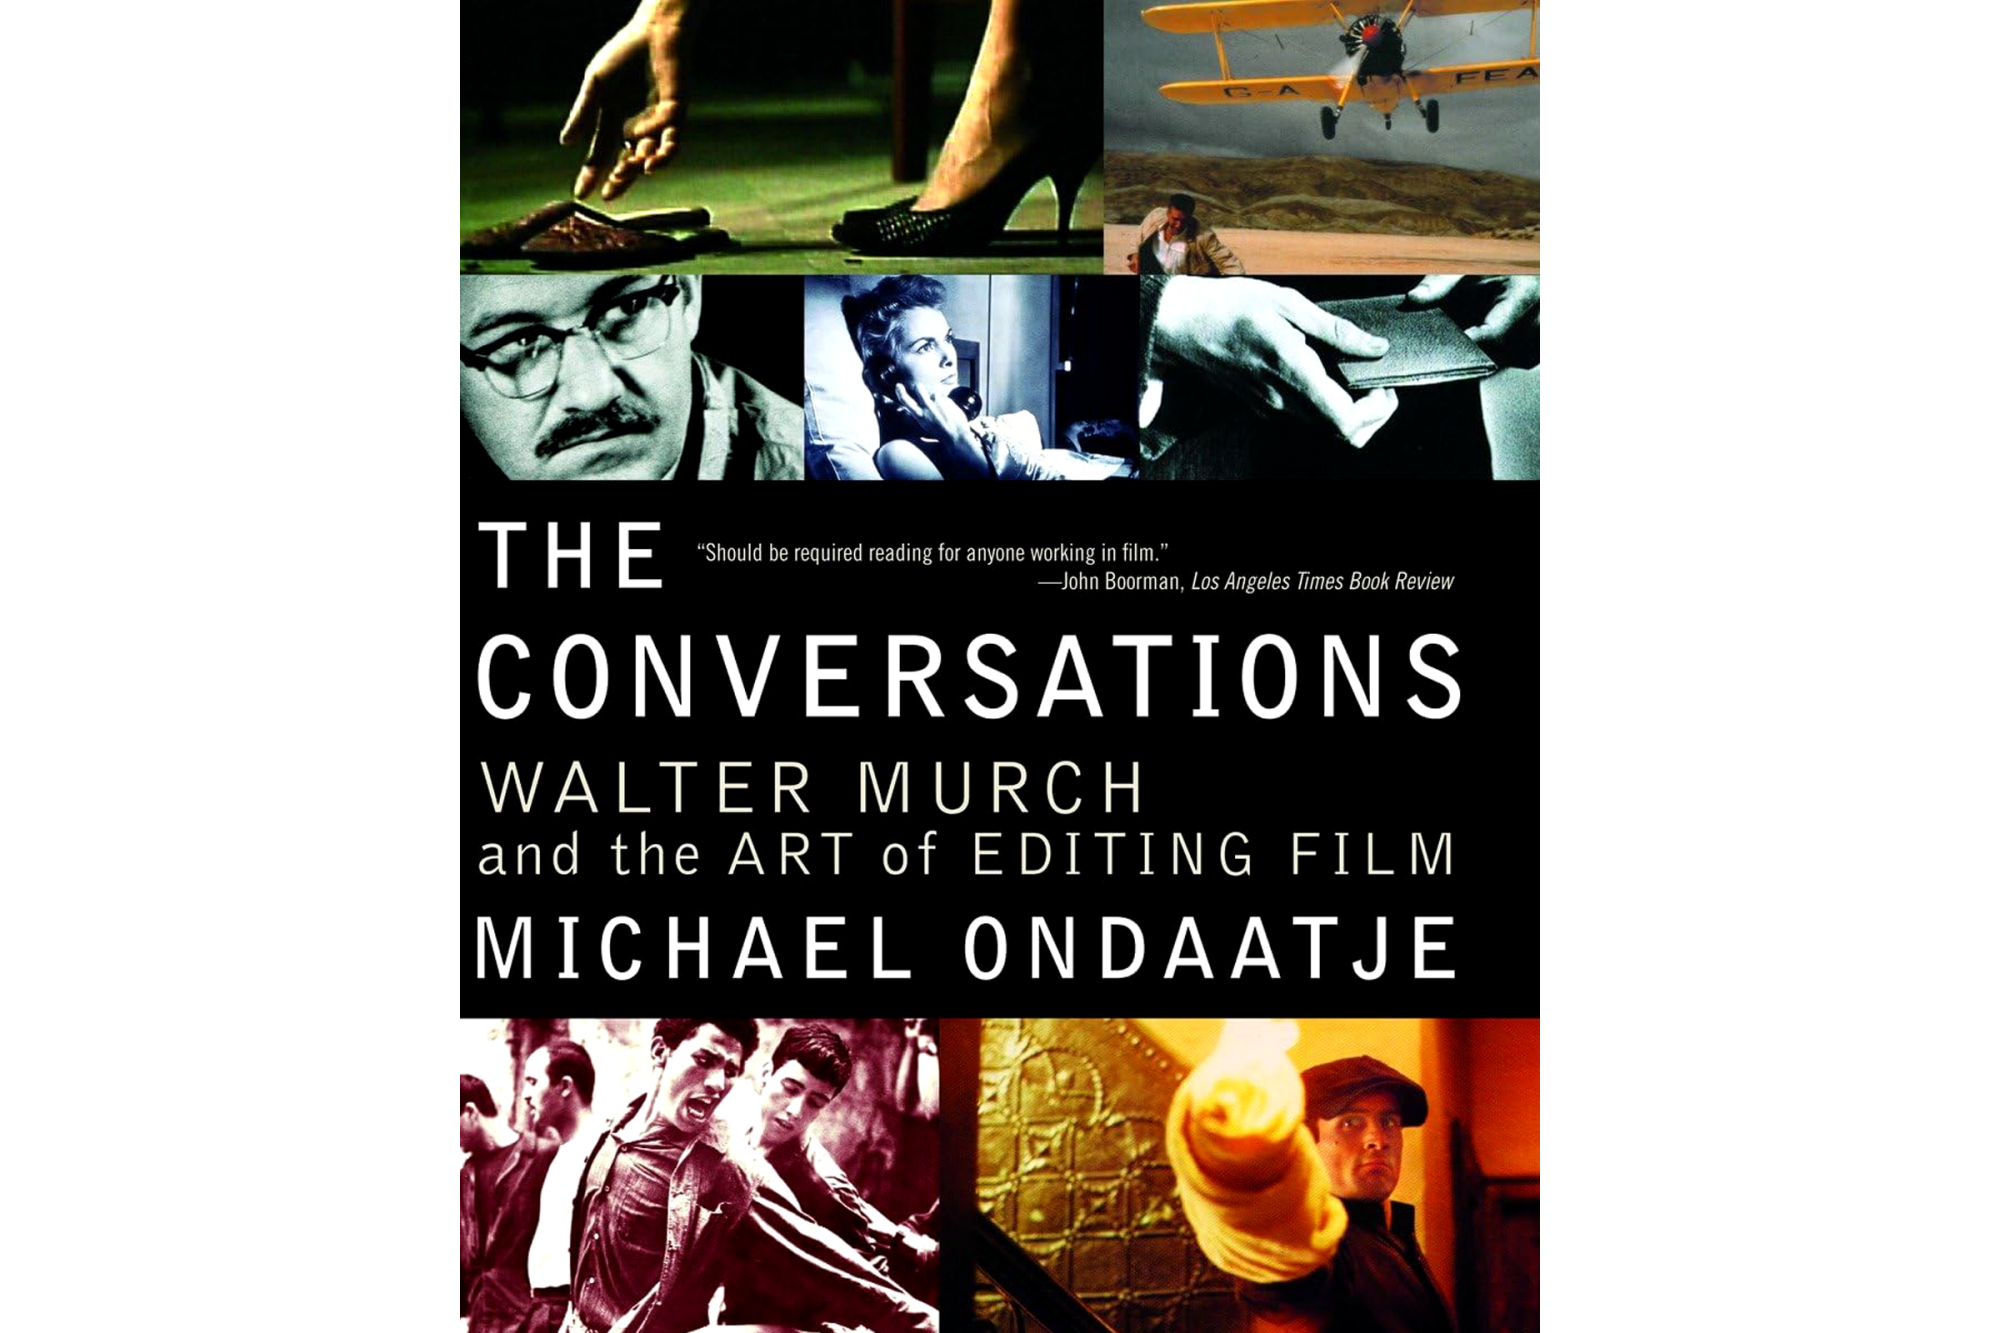 "The Conversations: Walter Murch and the Art of Editing Film" by Michael Ondaatje